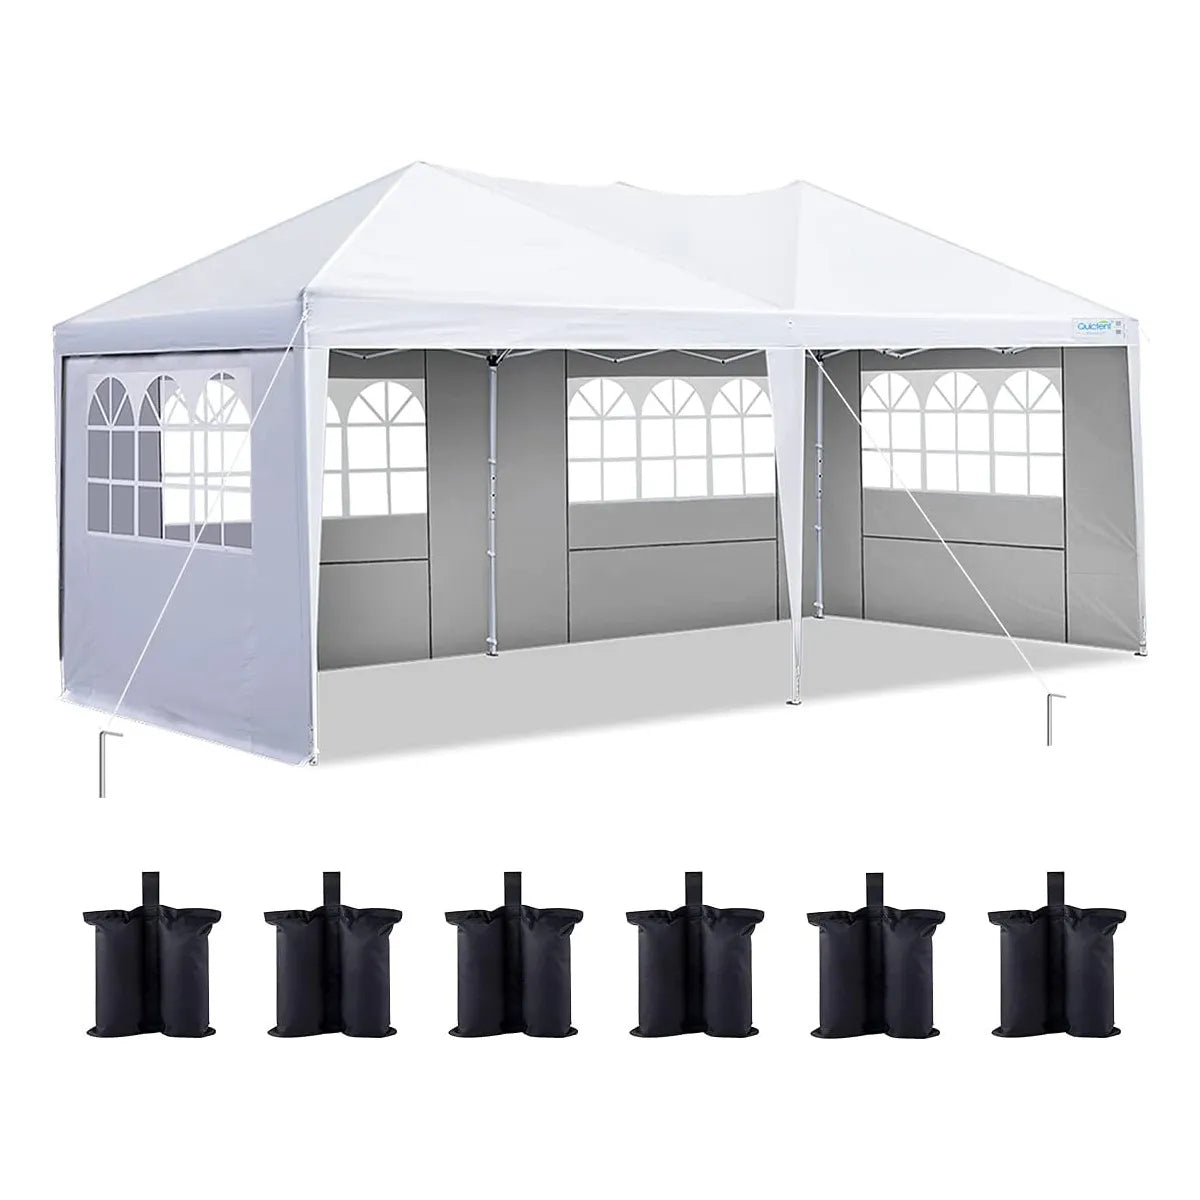 10 x 20 Pop up Party Tent Canopy